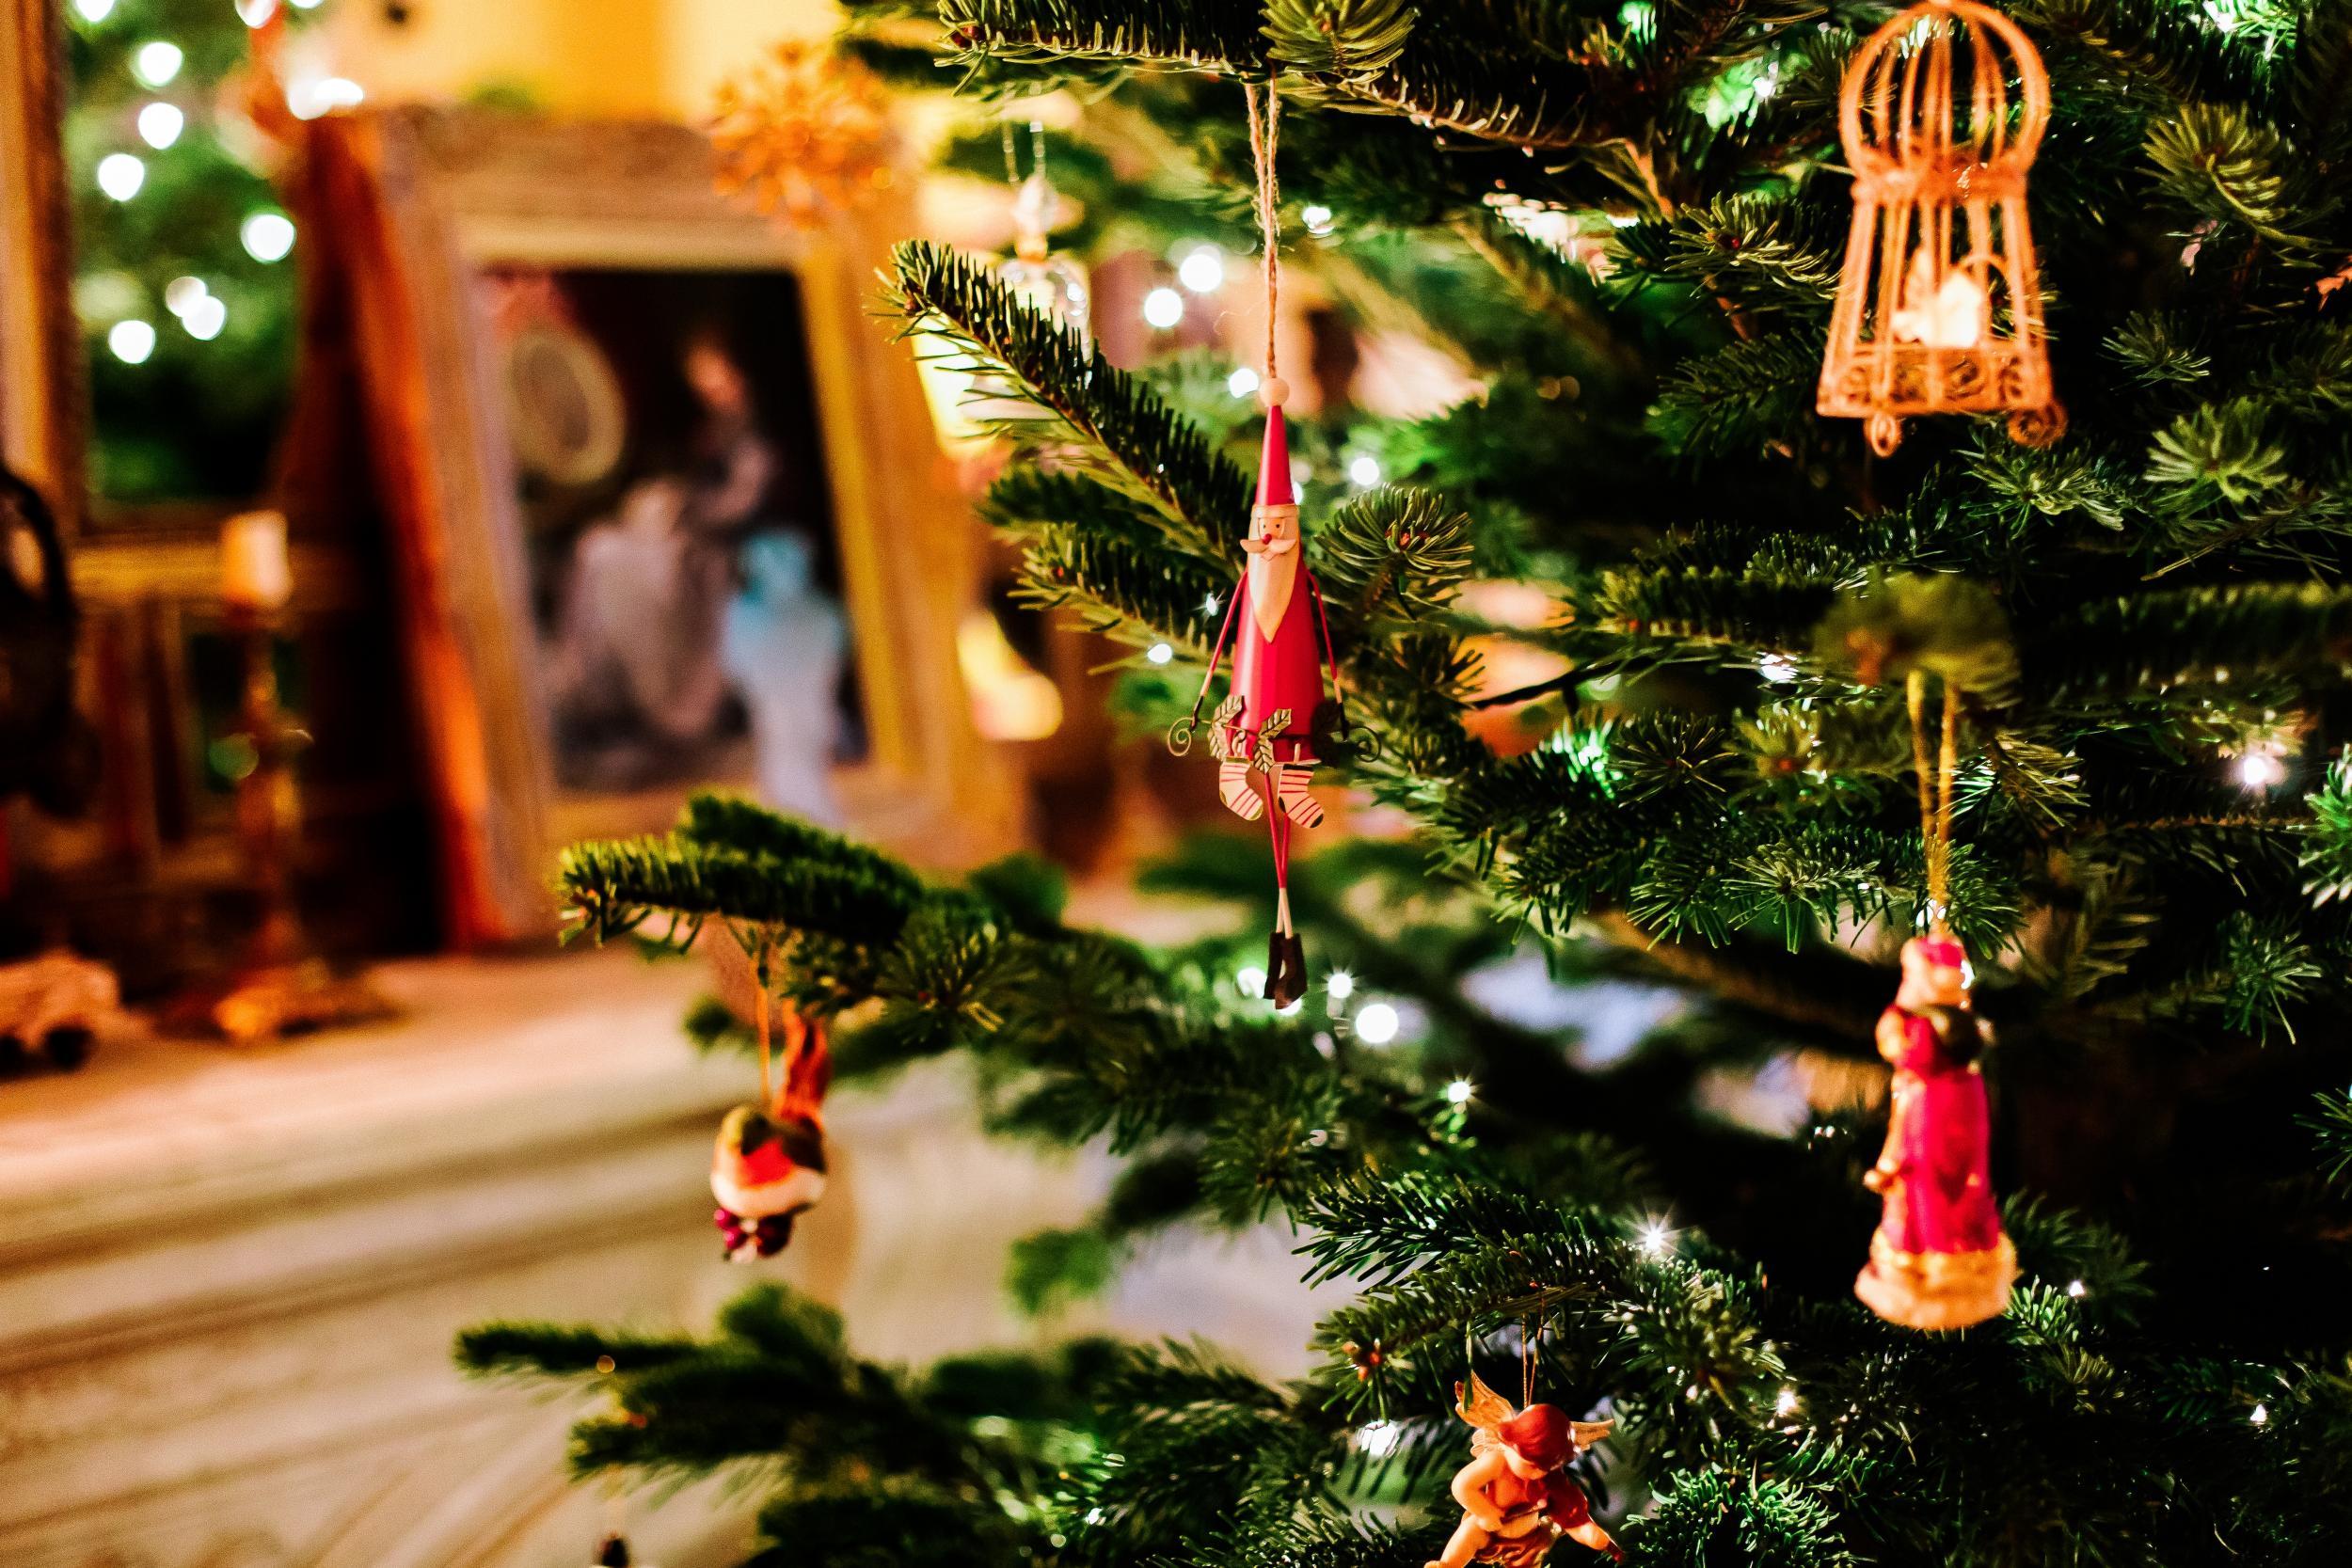 People who put up Christmas decorations early are happier, experts reveal, The Independent